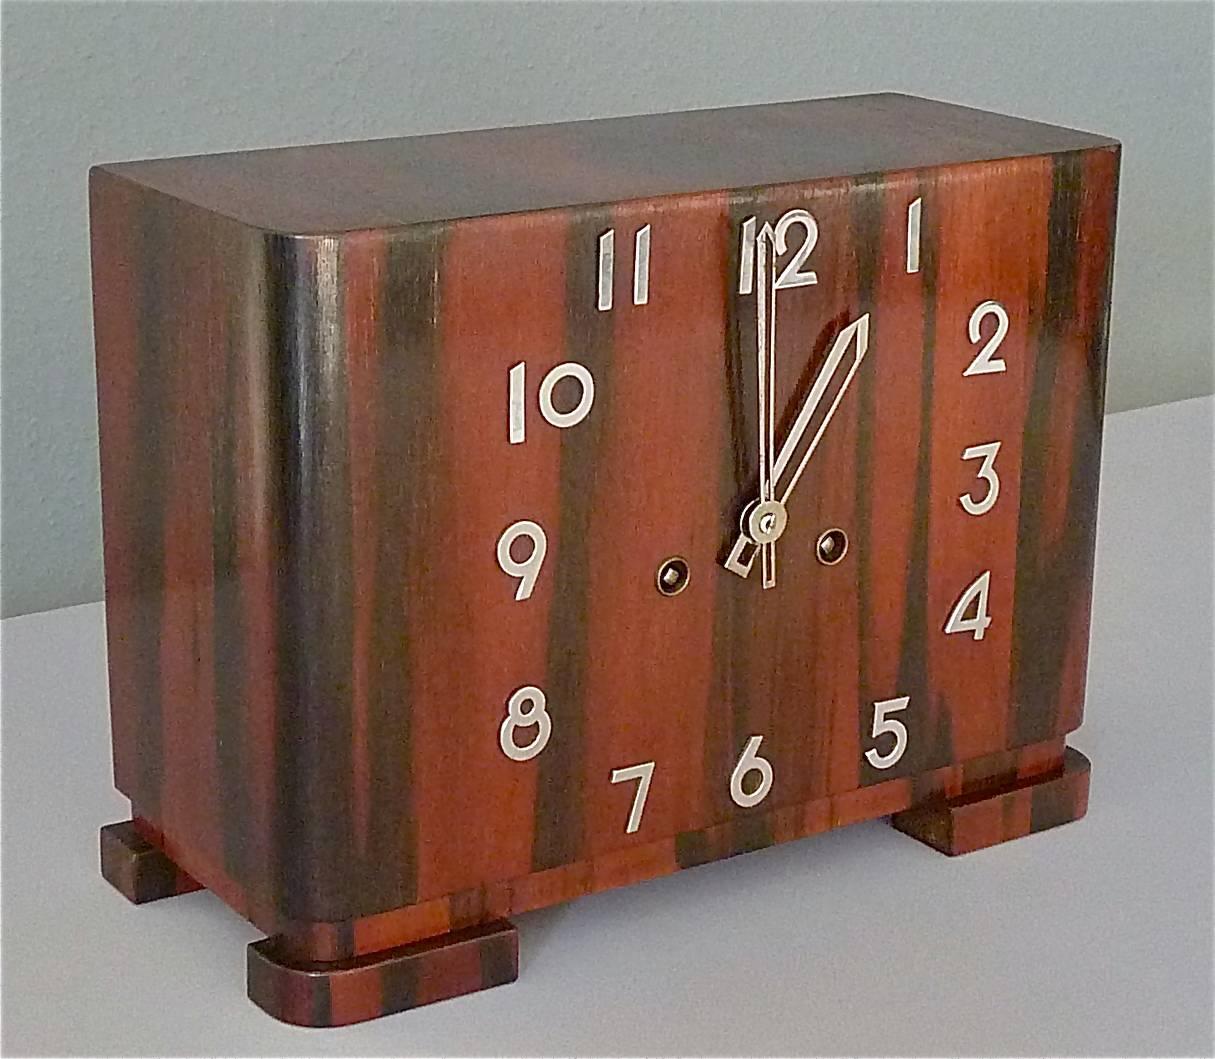 Awesome Art Deco / Bauhaus mantel desk clock made in Germany, circa 1925-1935 with attribution to Kienzle or Junghans in Germany. It is made of dark wood on a wood body with chromed numbers and hands. The modernist clock has a mechanic movement with